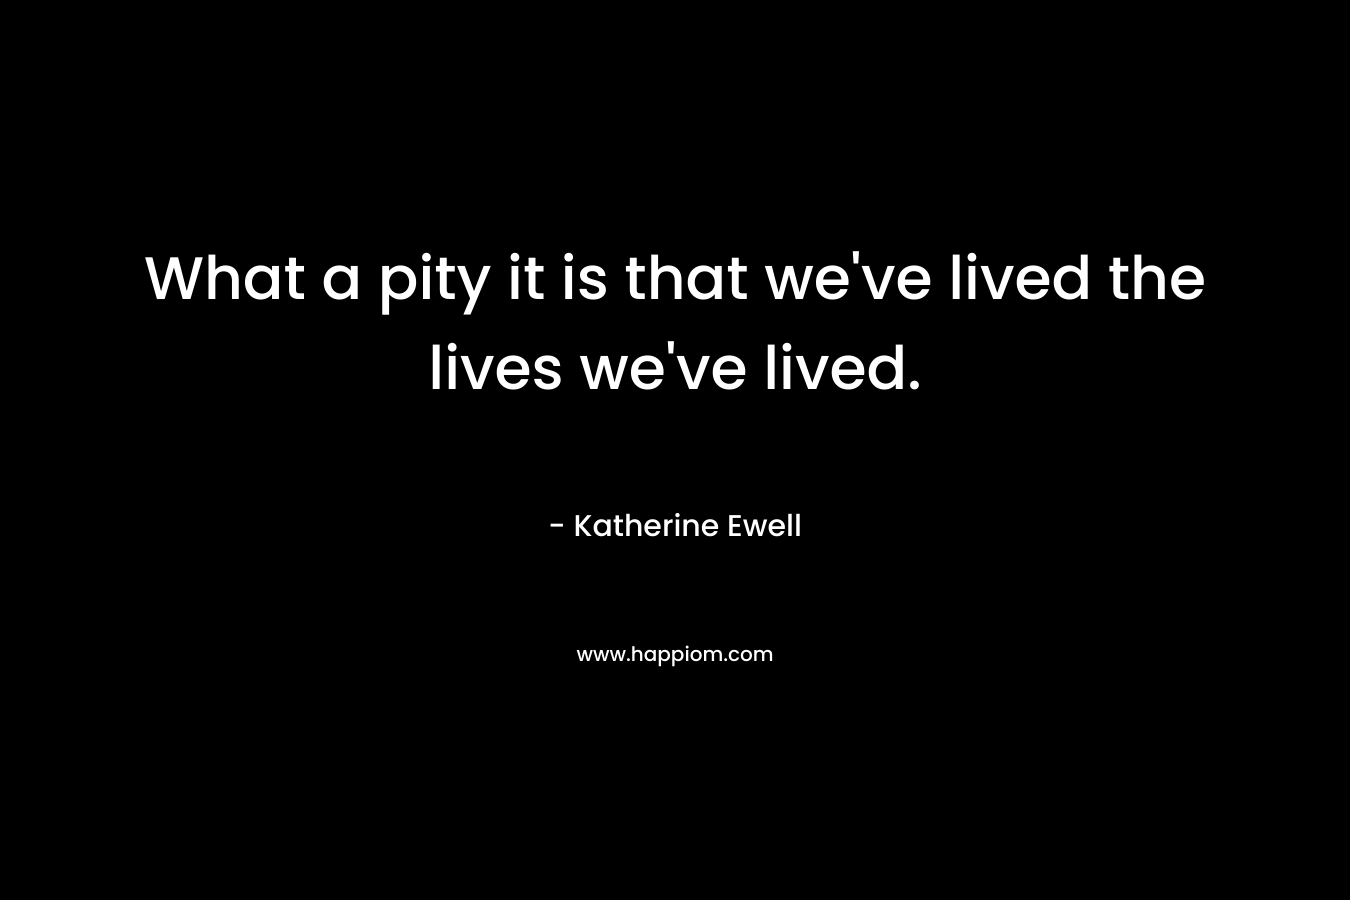 What a pity it is that we've lived the lives we've lived.